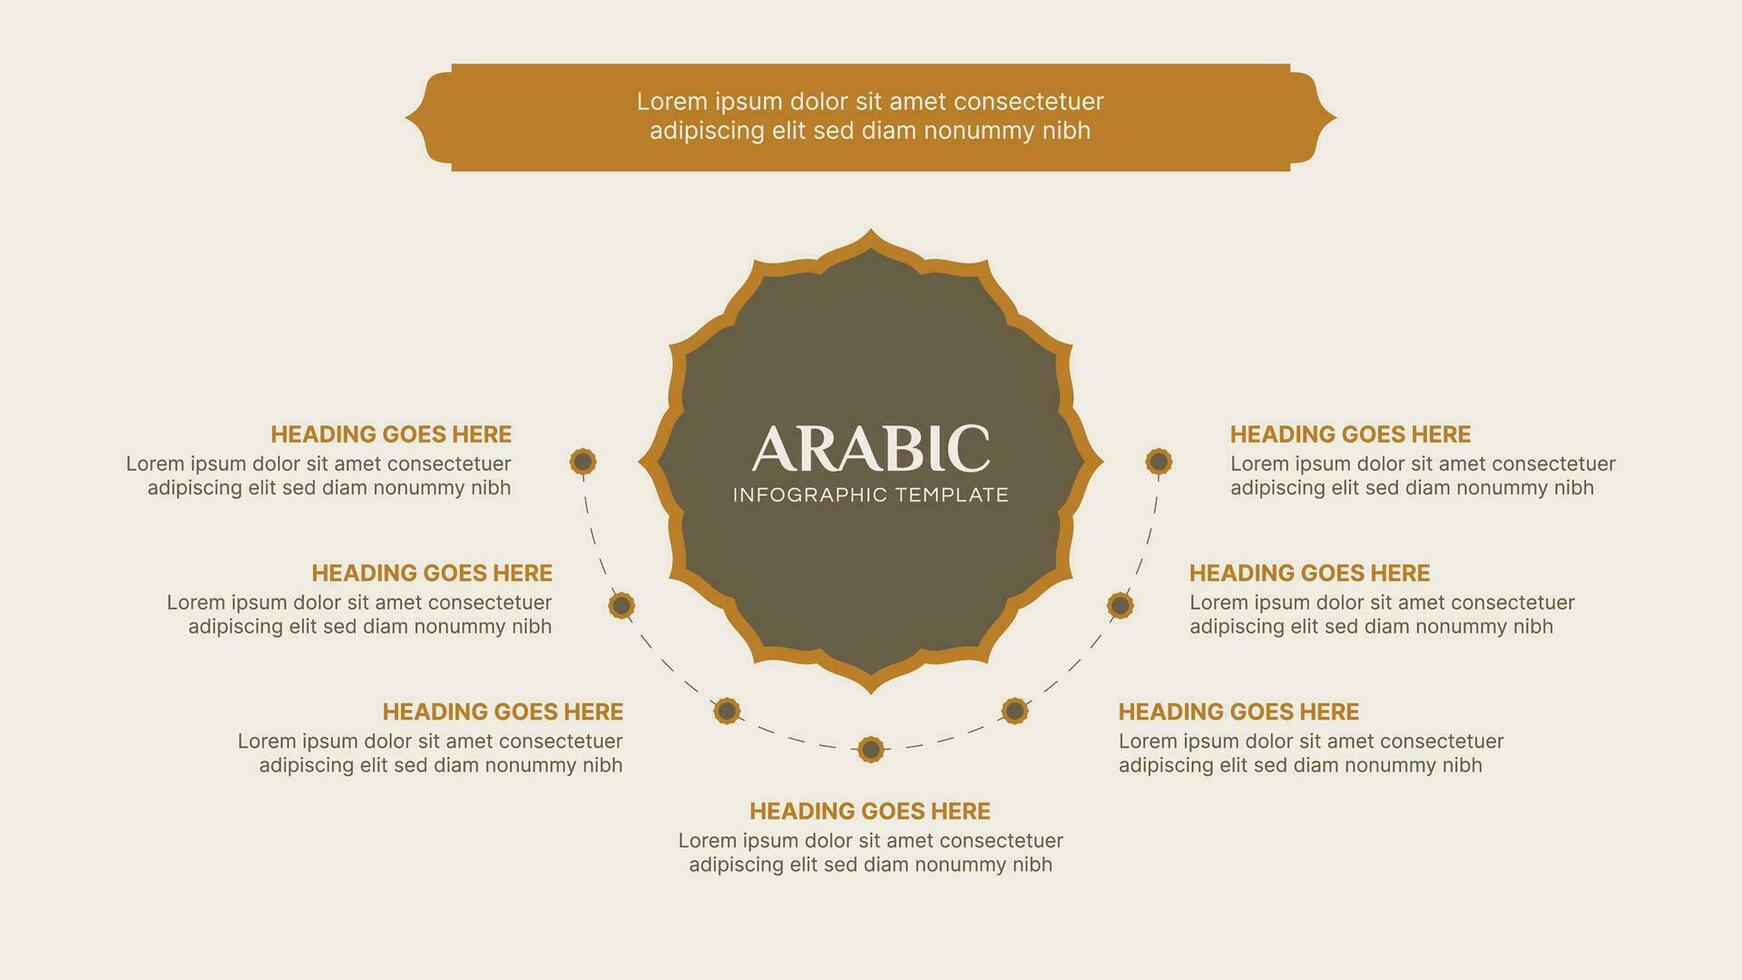 Islamic Infographic Design Template with Arabic Style Design Elements vector